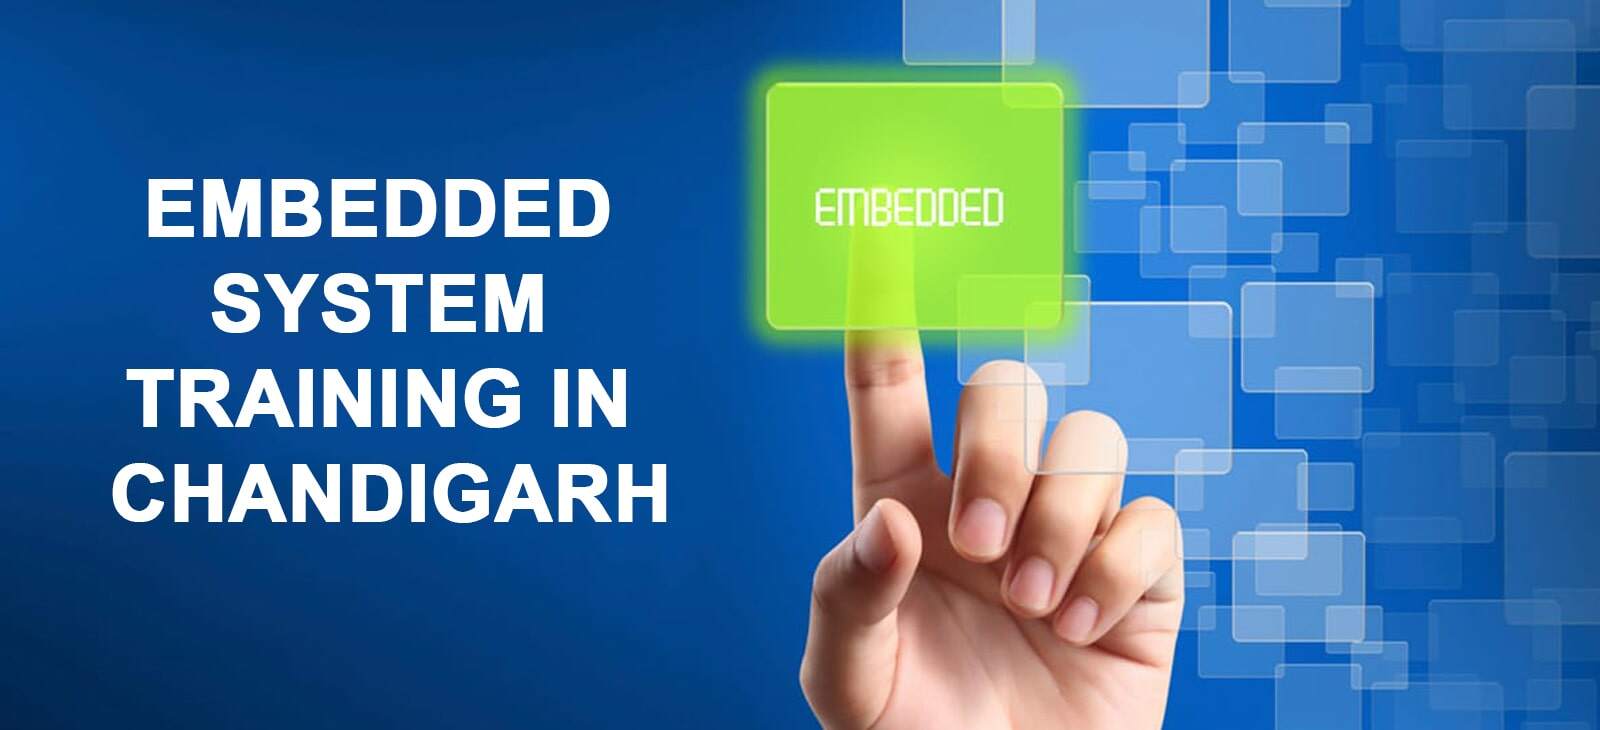 Embedded Systems Training in Chandigarh Mohali Panchkula